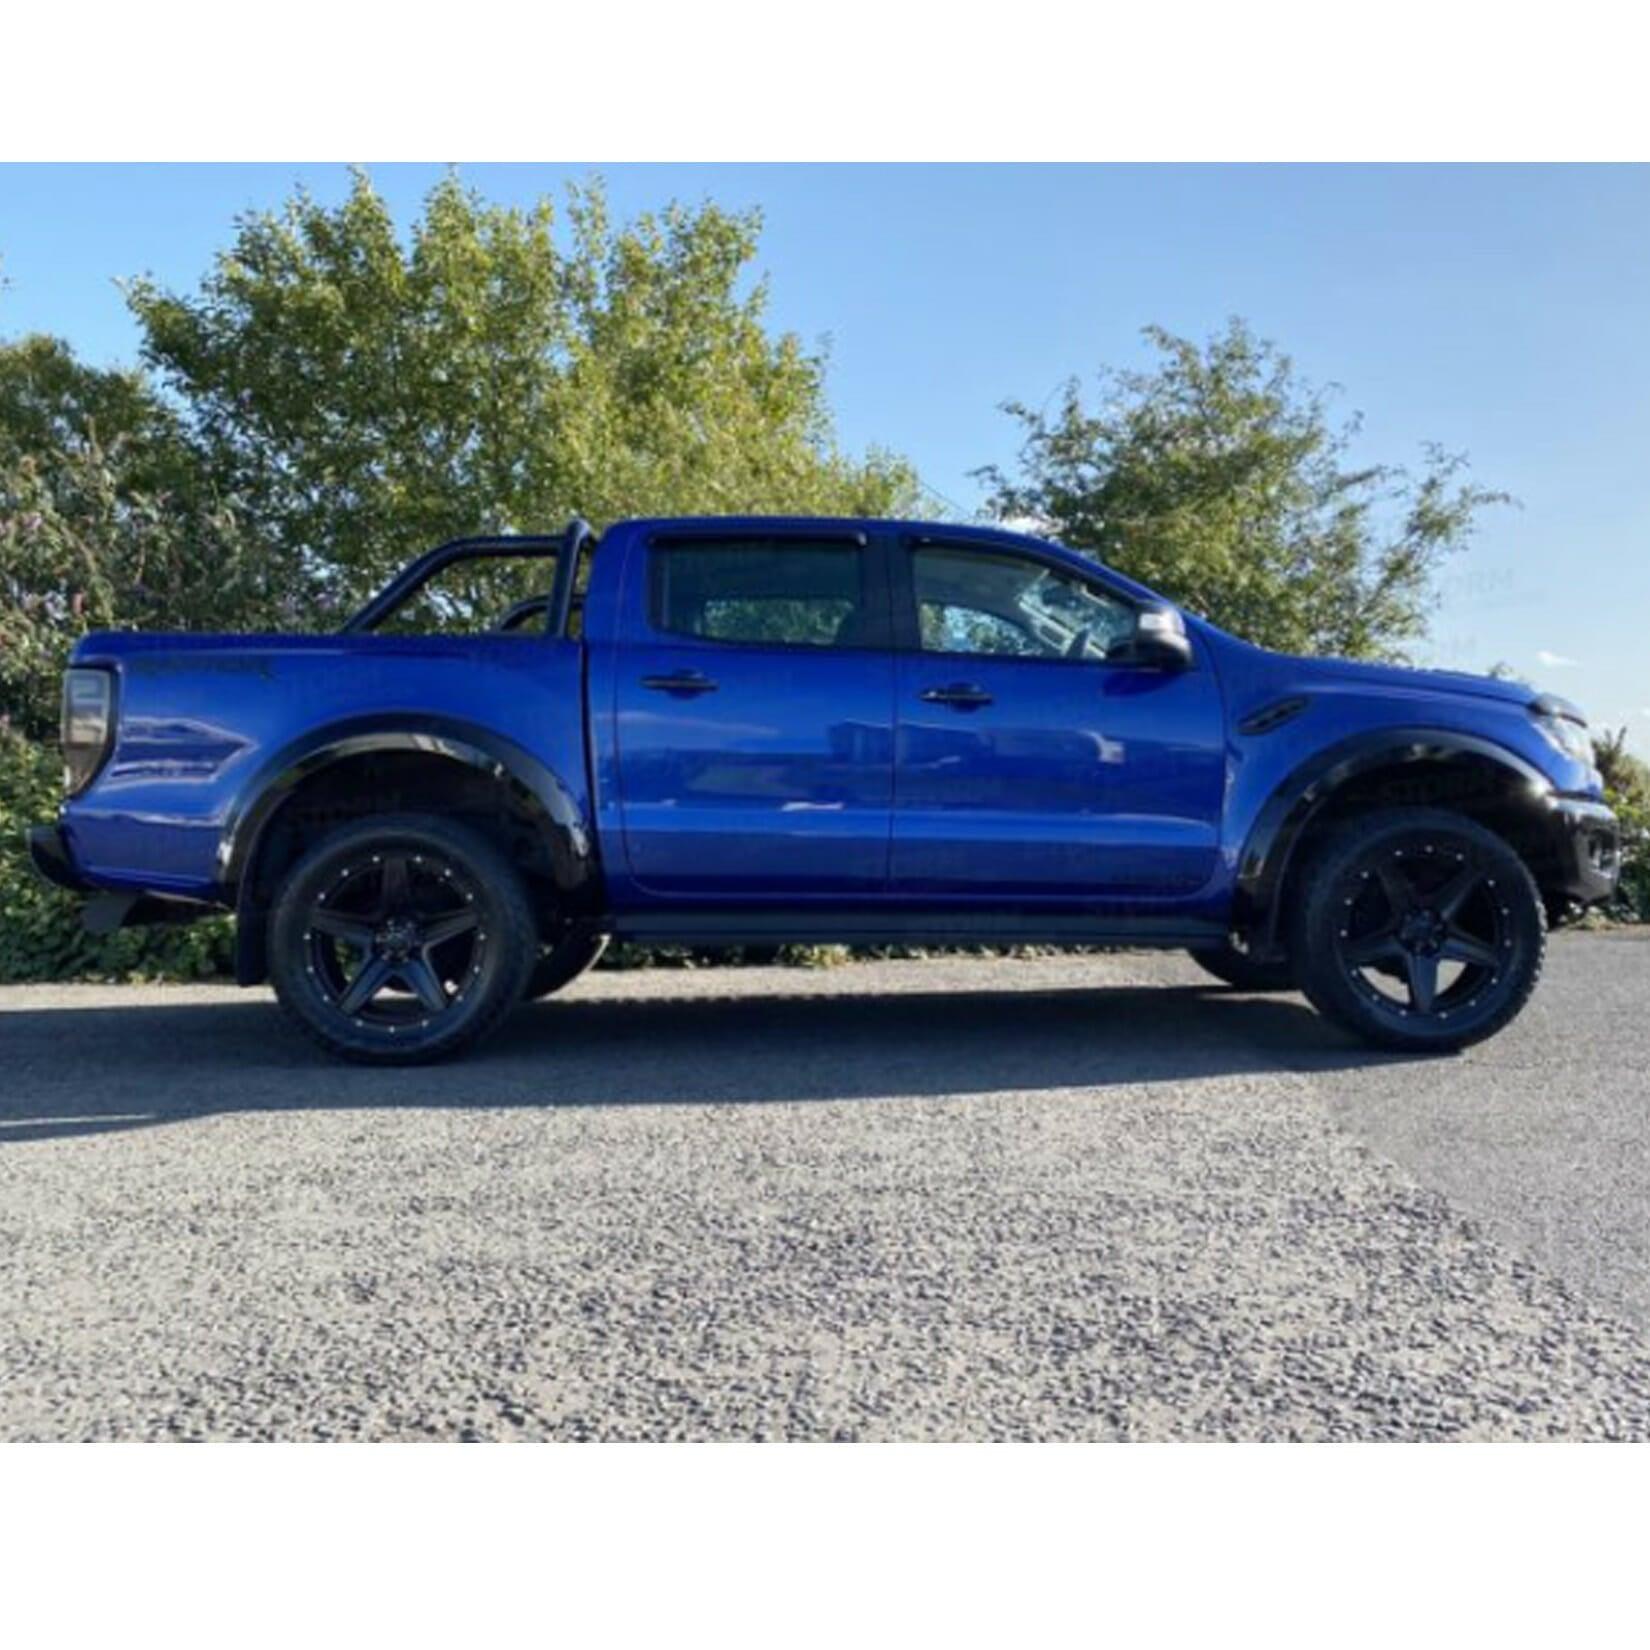 FORD RANGER RAPTOR FULL BODY CONVERSION KIT - CALL FOR DETAILS - Storm Xccessories2